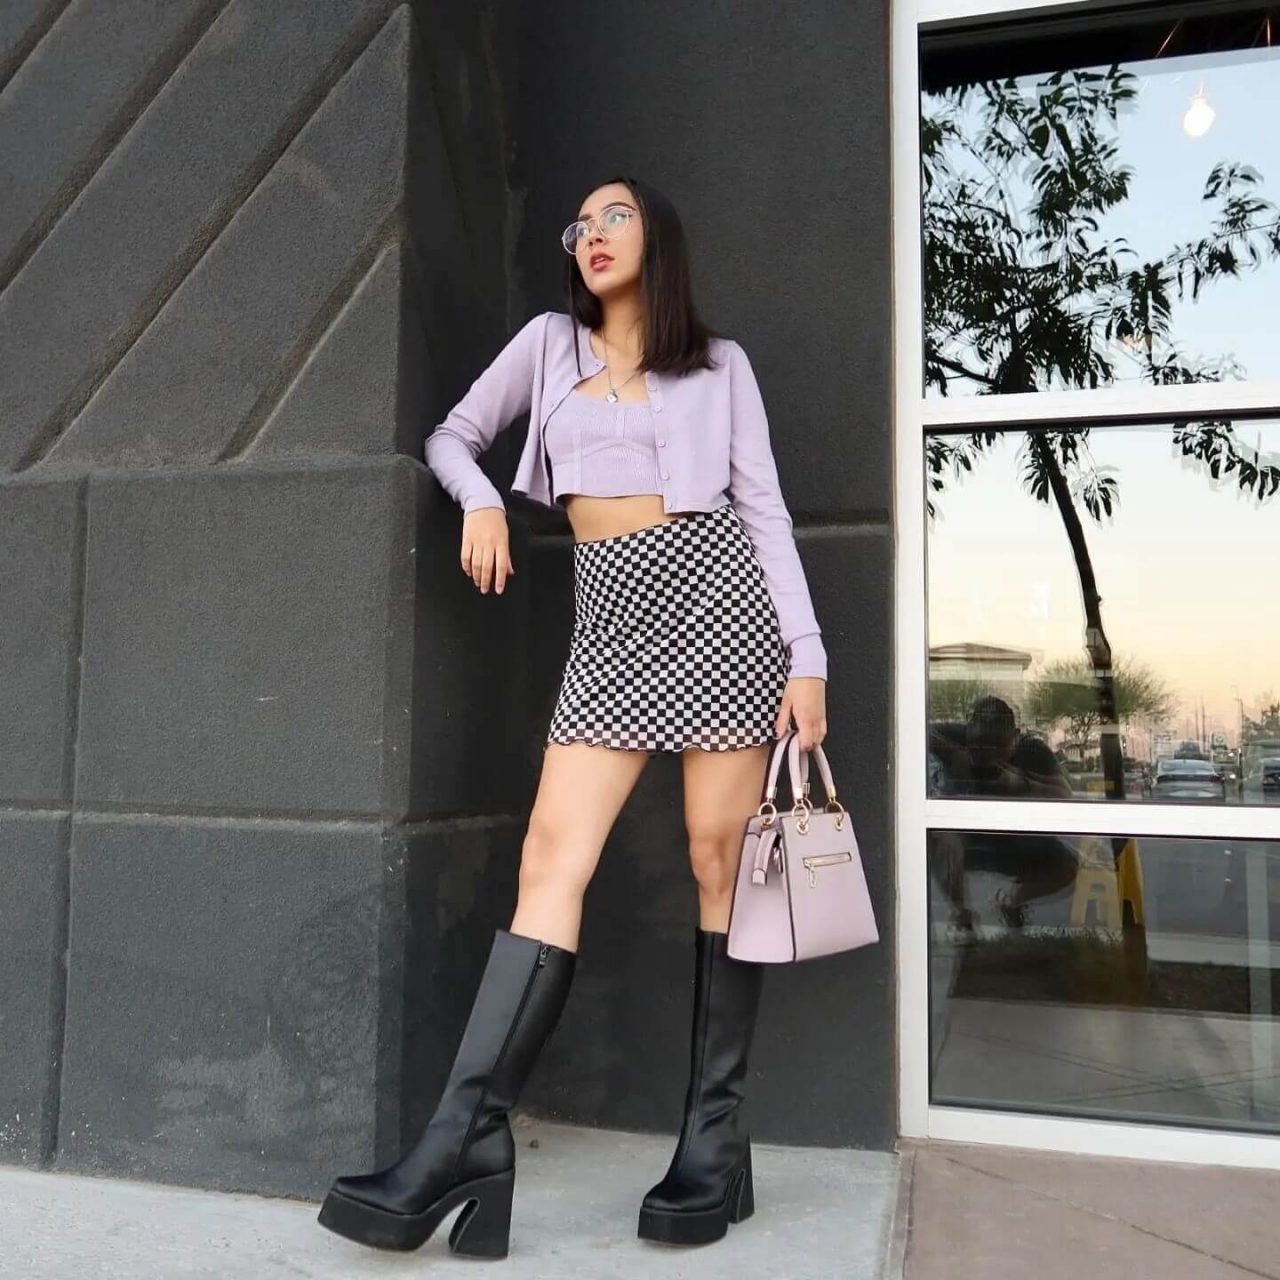 Combination Of Platform Boots With A Skirt 